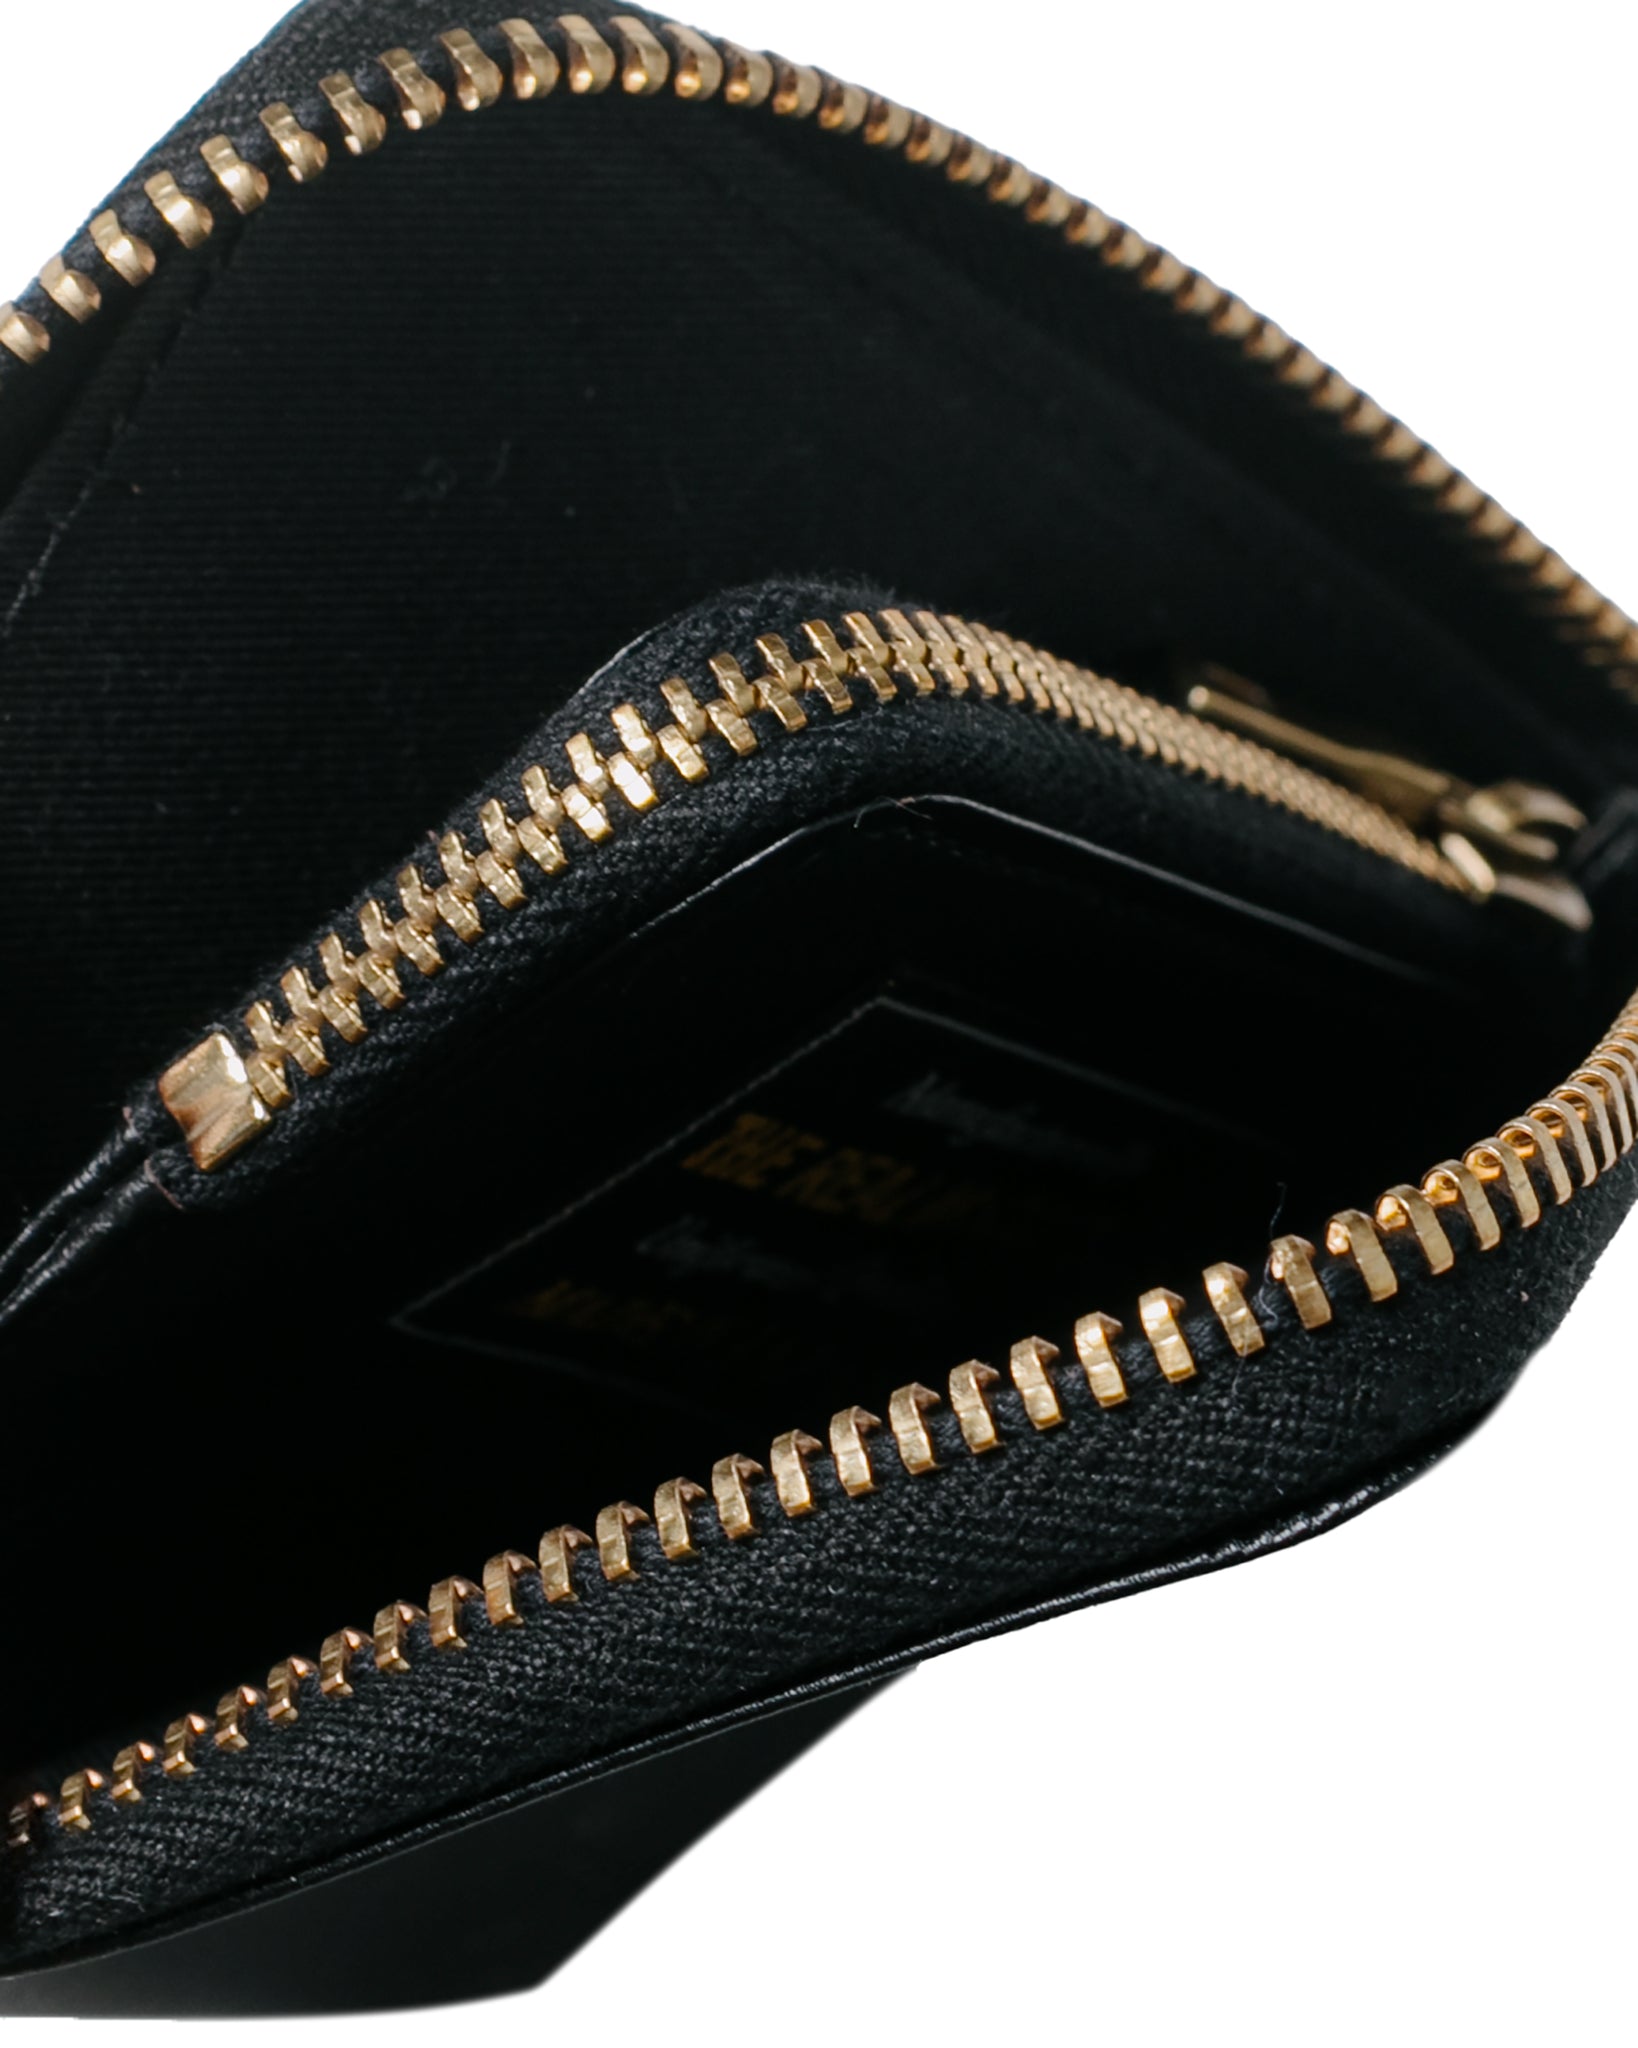 The Real McCoy's MW17100 McCoy's Horsehide Wallet Black detail